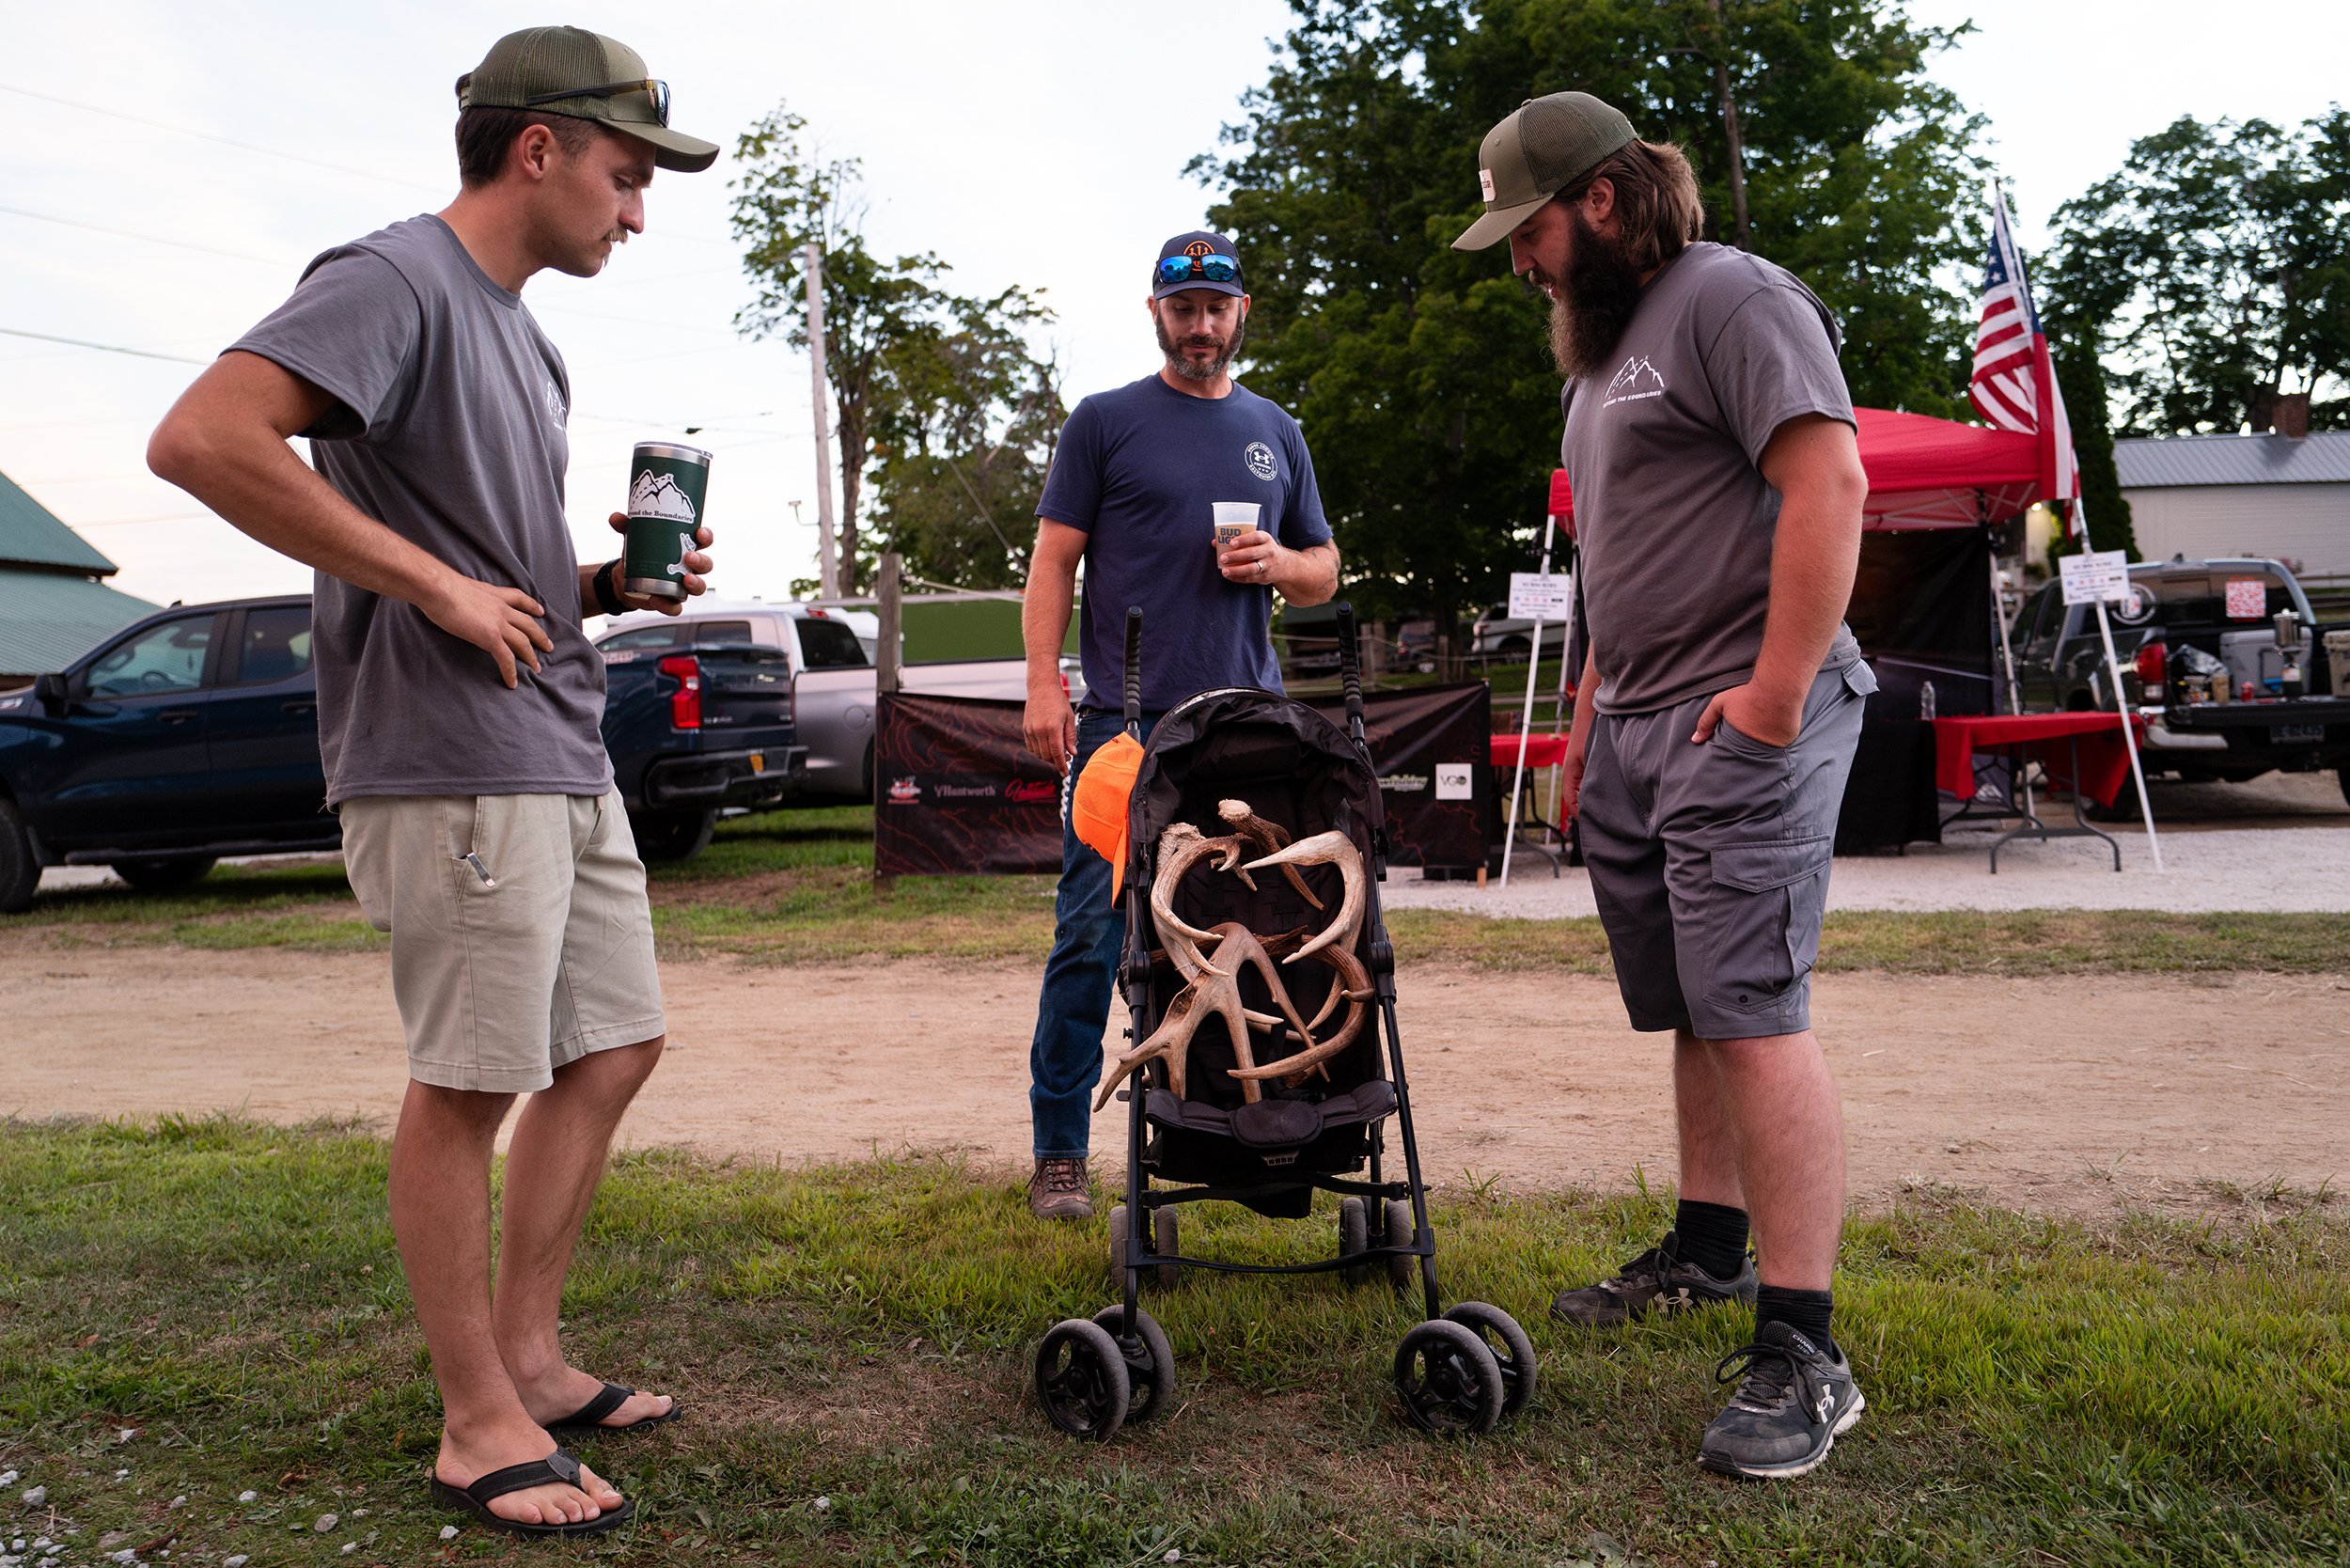  Chad Fletcher (center) shows Ian McKendry (left) and Dawson Daigle a stroller full of deer antlers he shed hunted and brought to Huntstock at Wildwood Farm in Westminster, Mass. on August 12, 2022.  